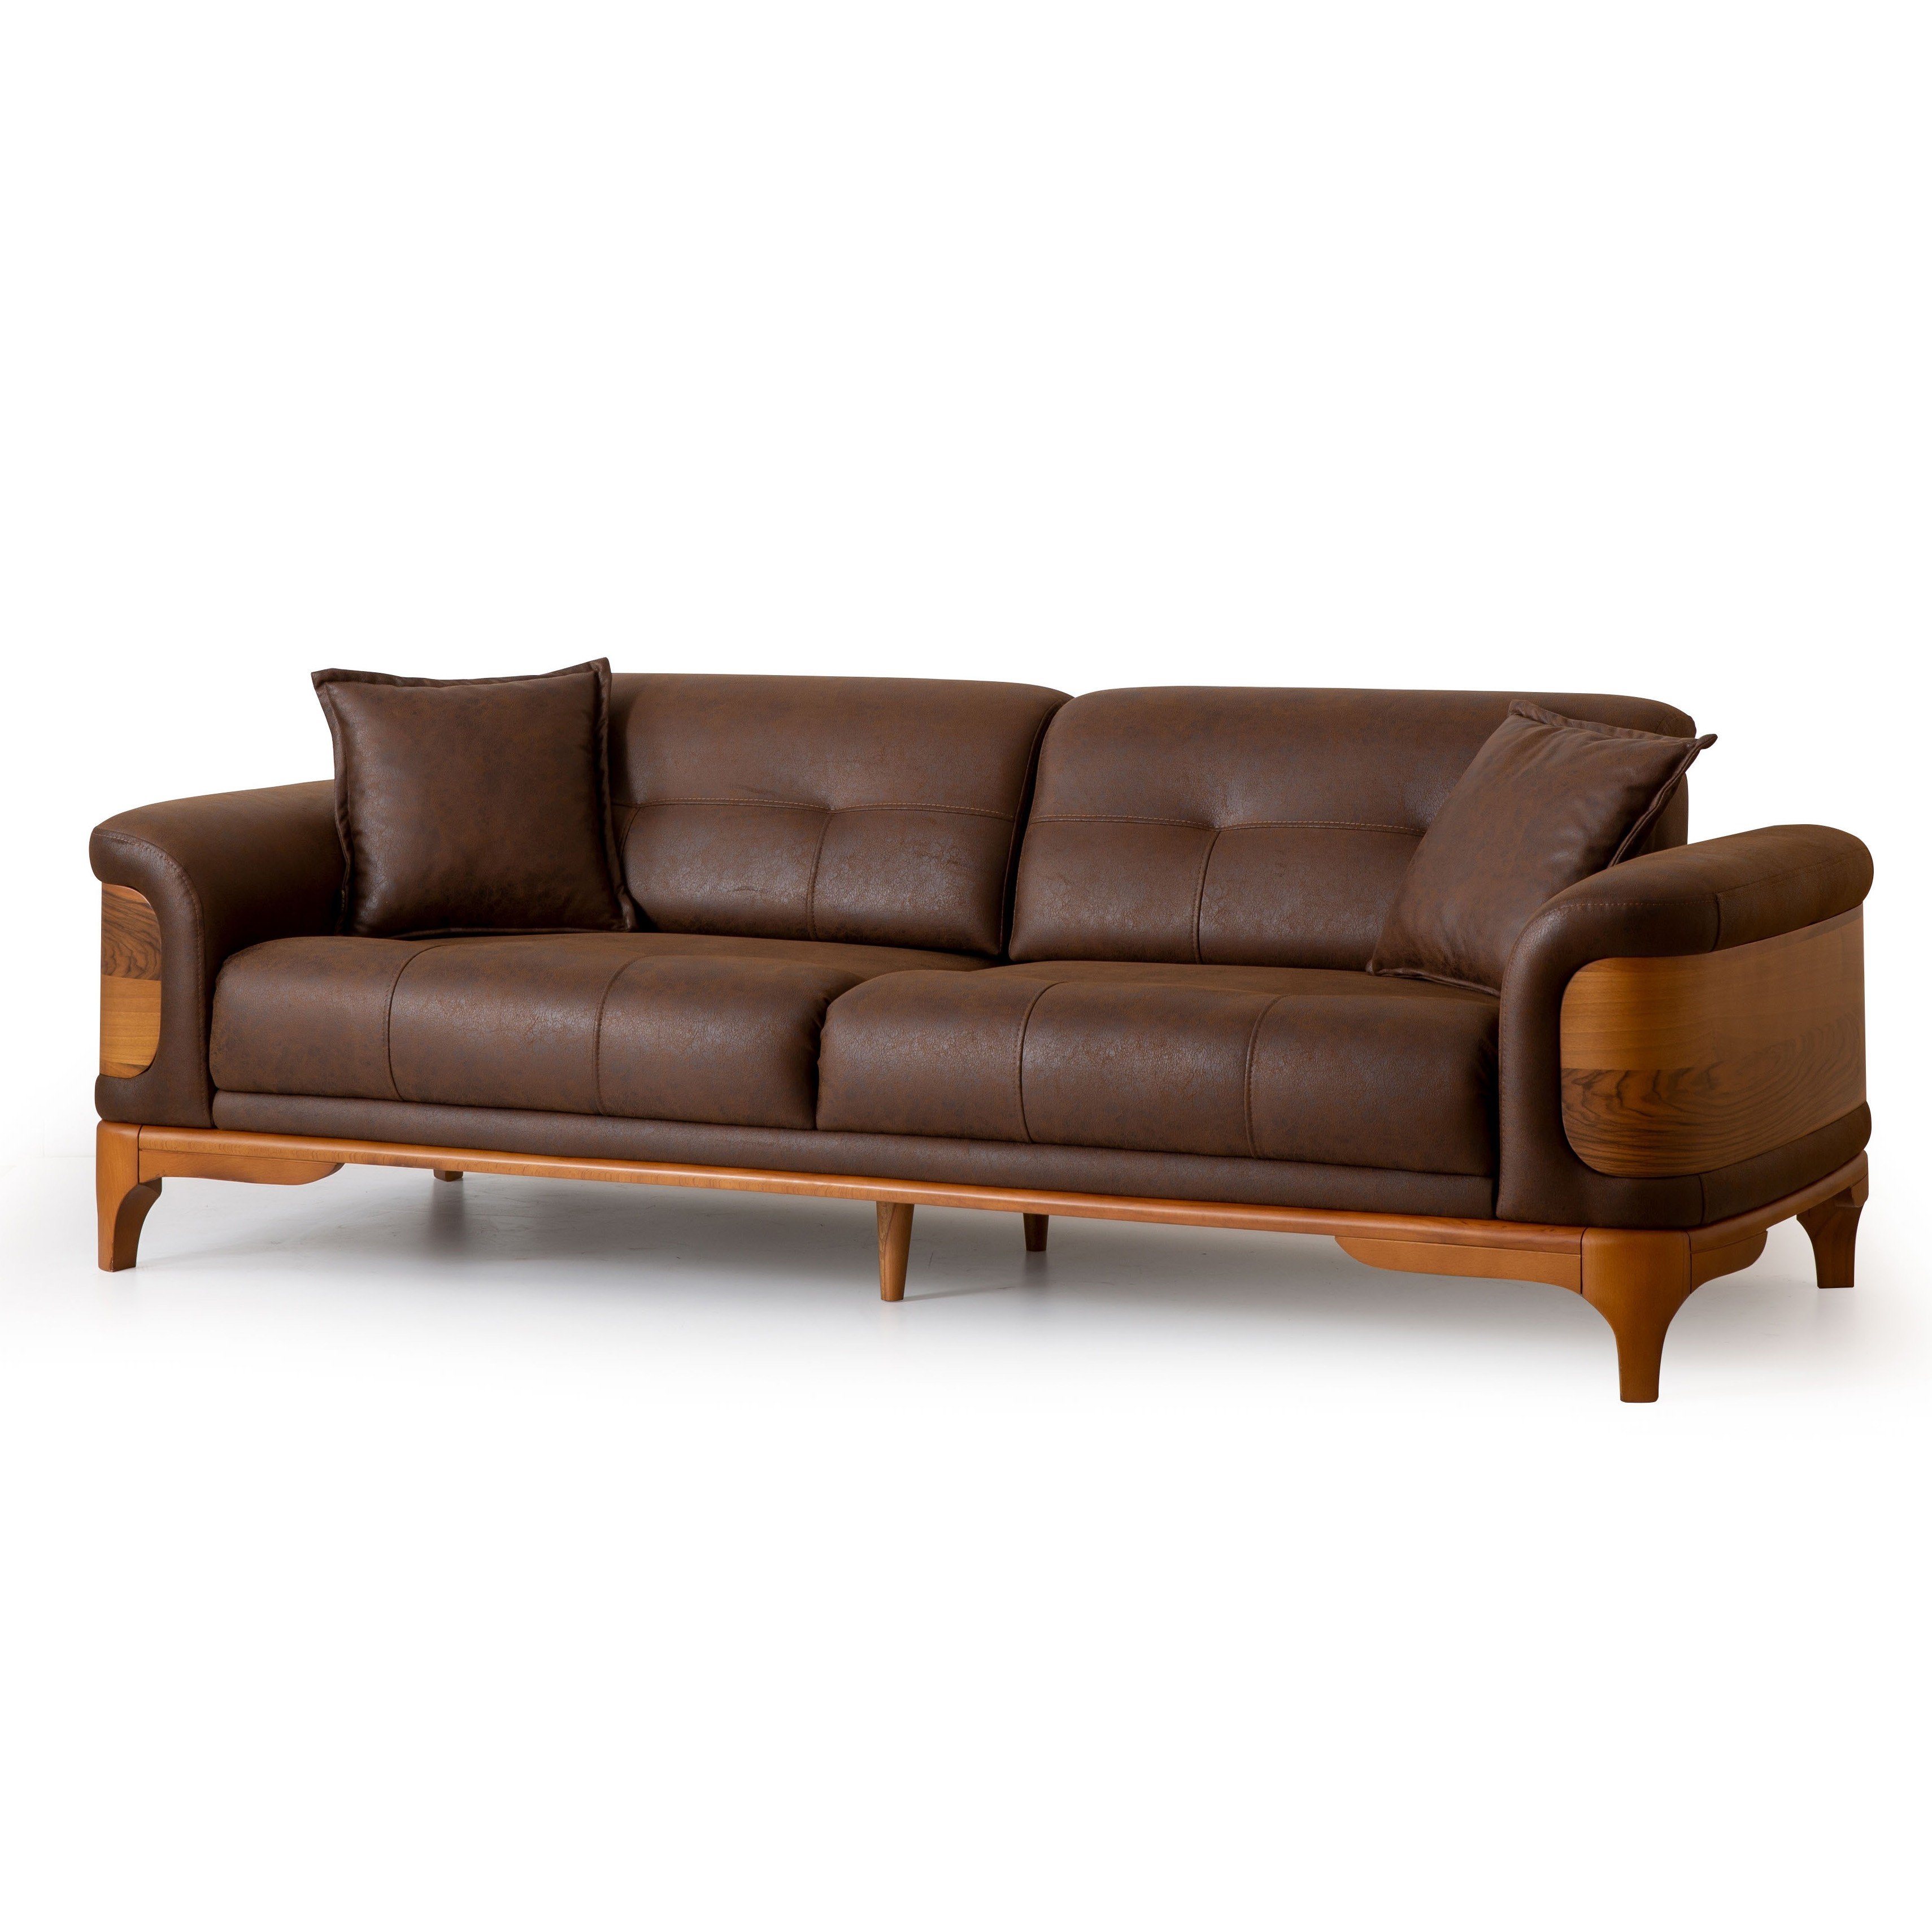 Wood 3 Seater Sofa Bed